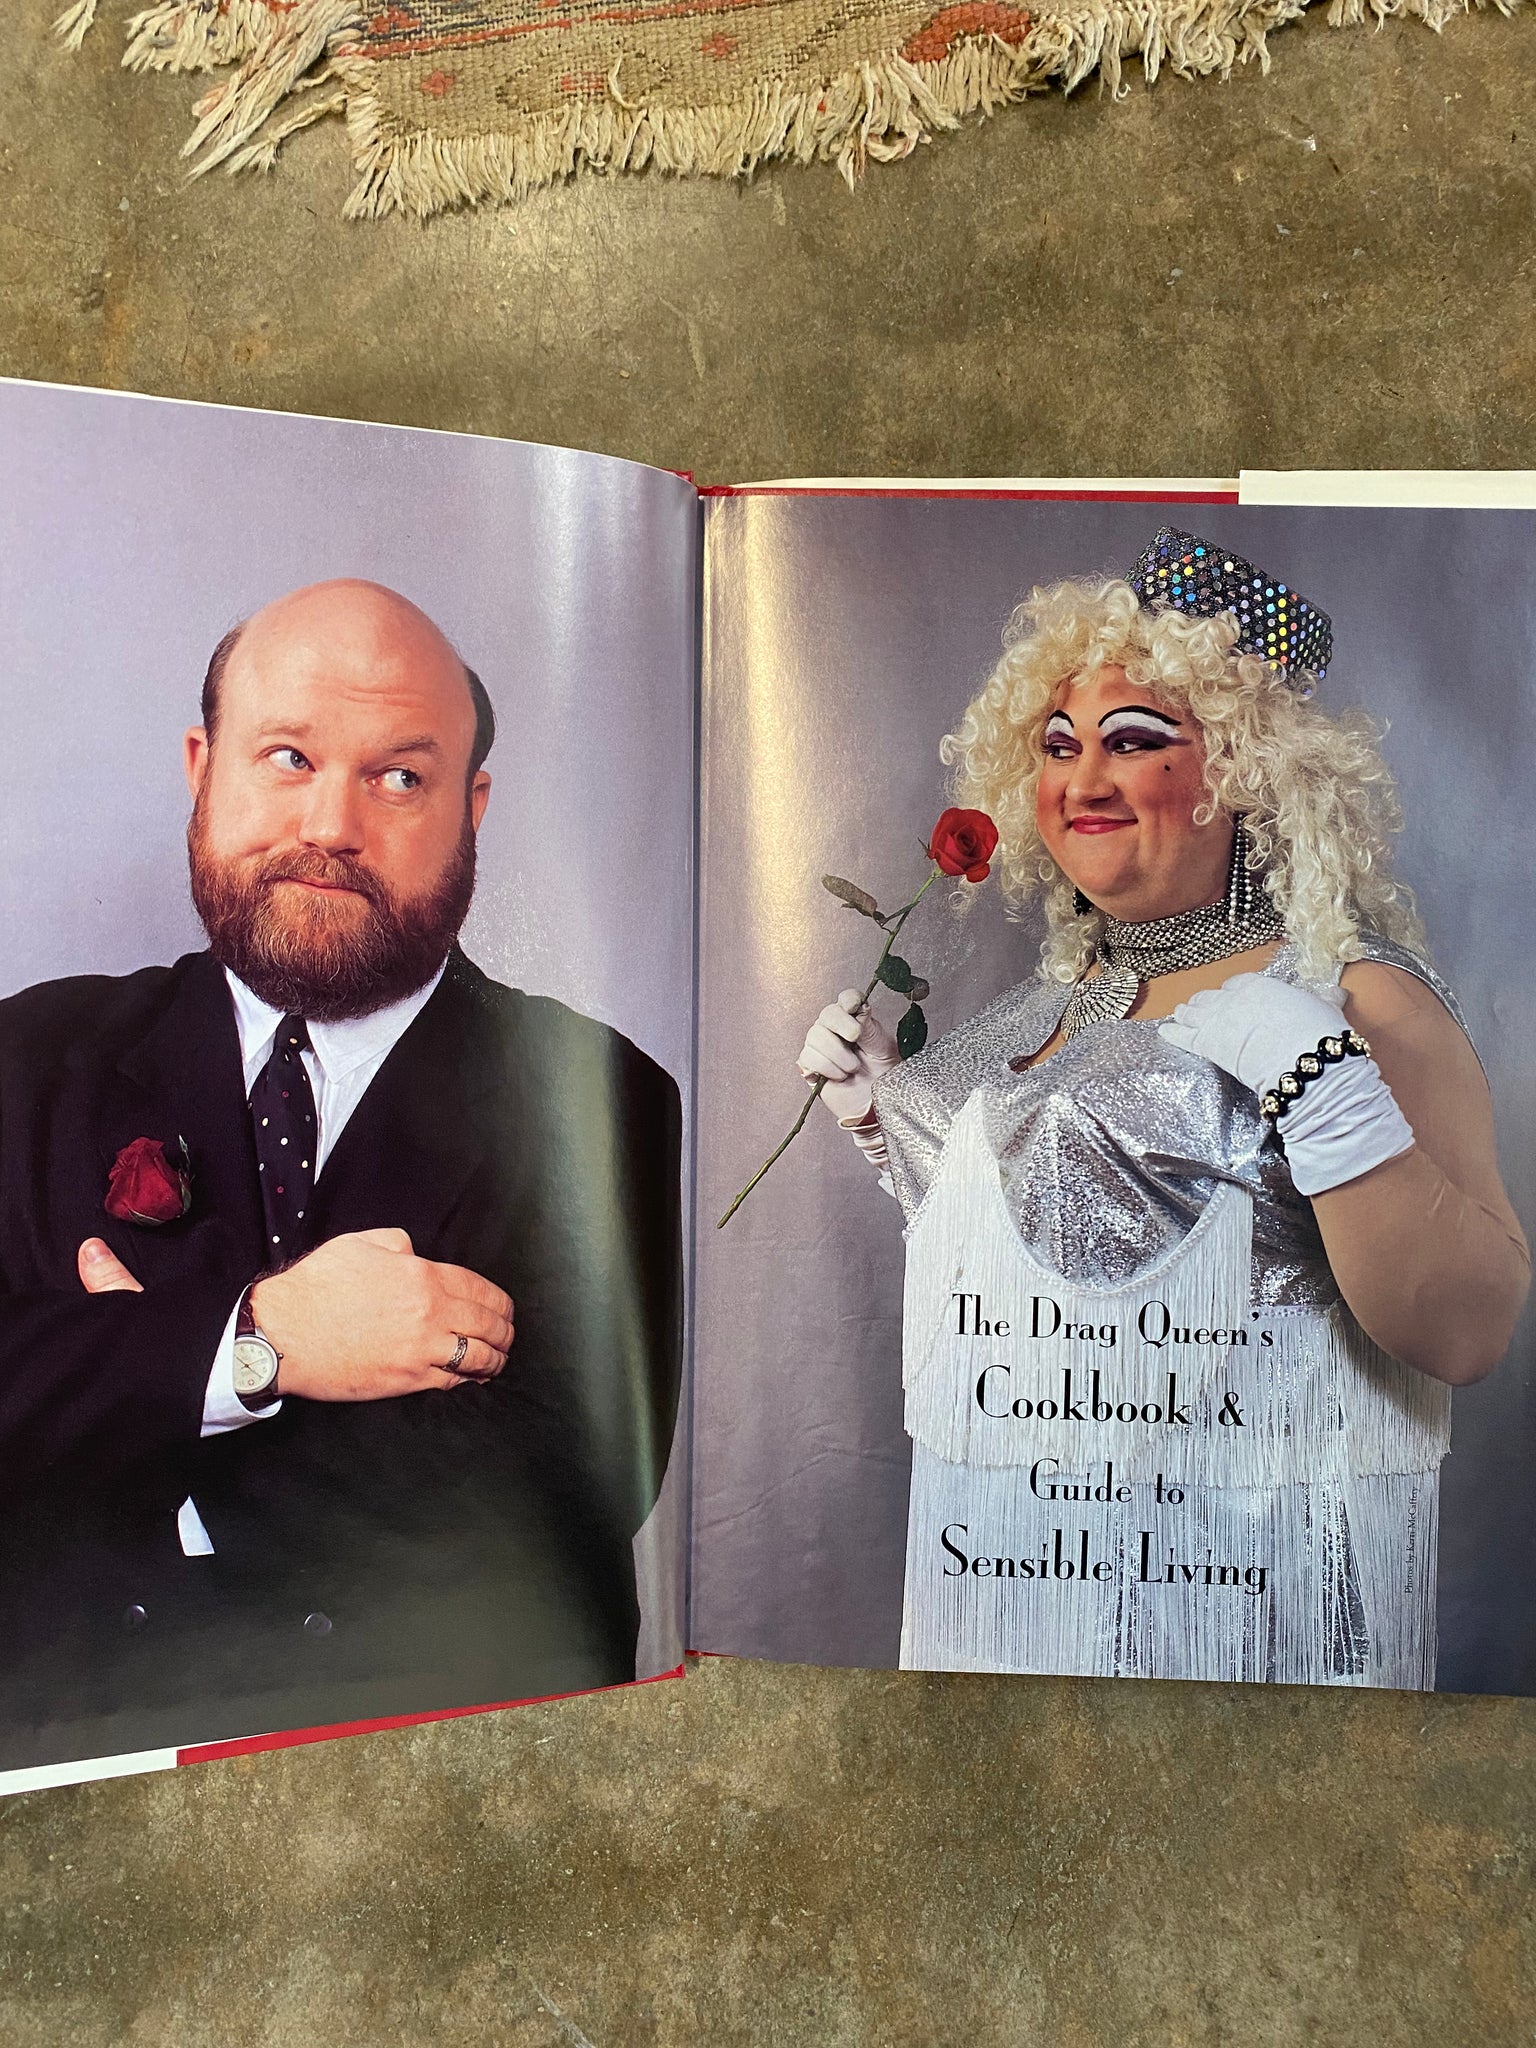 Ultra Rare “The Drag Queens Cookbook & Guide to Sensible Living”